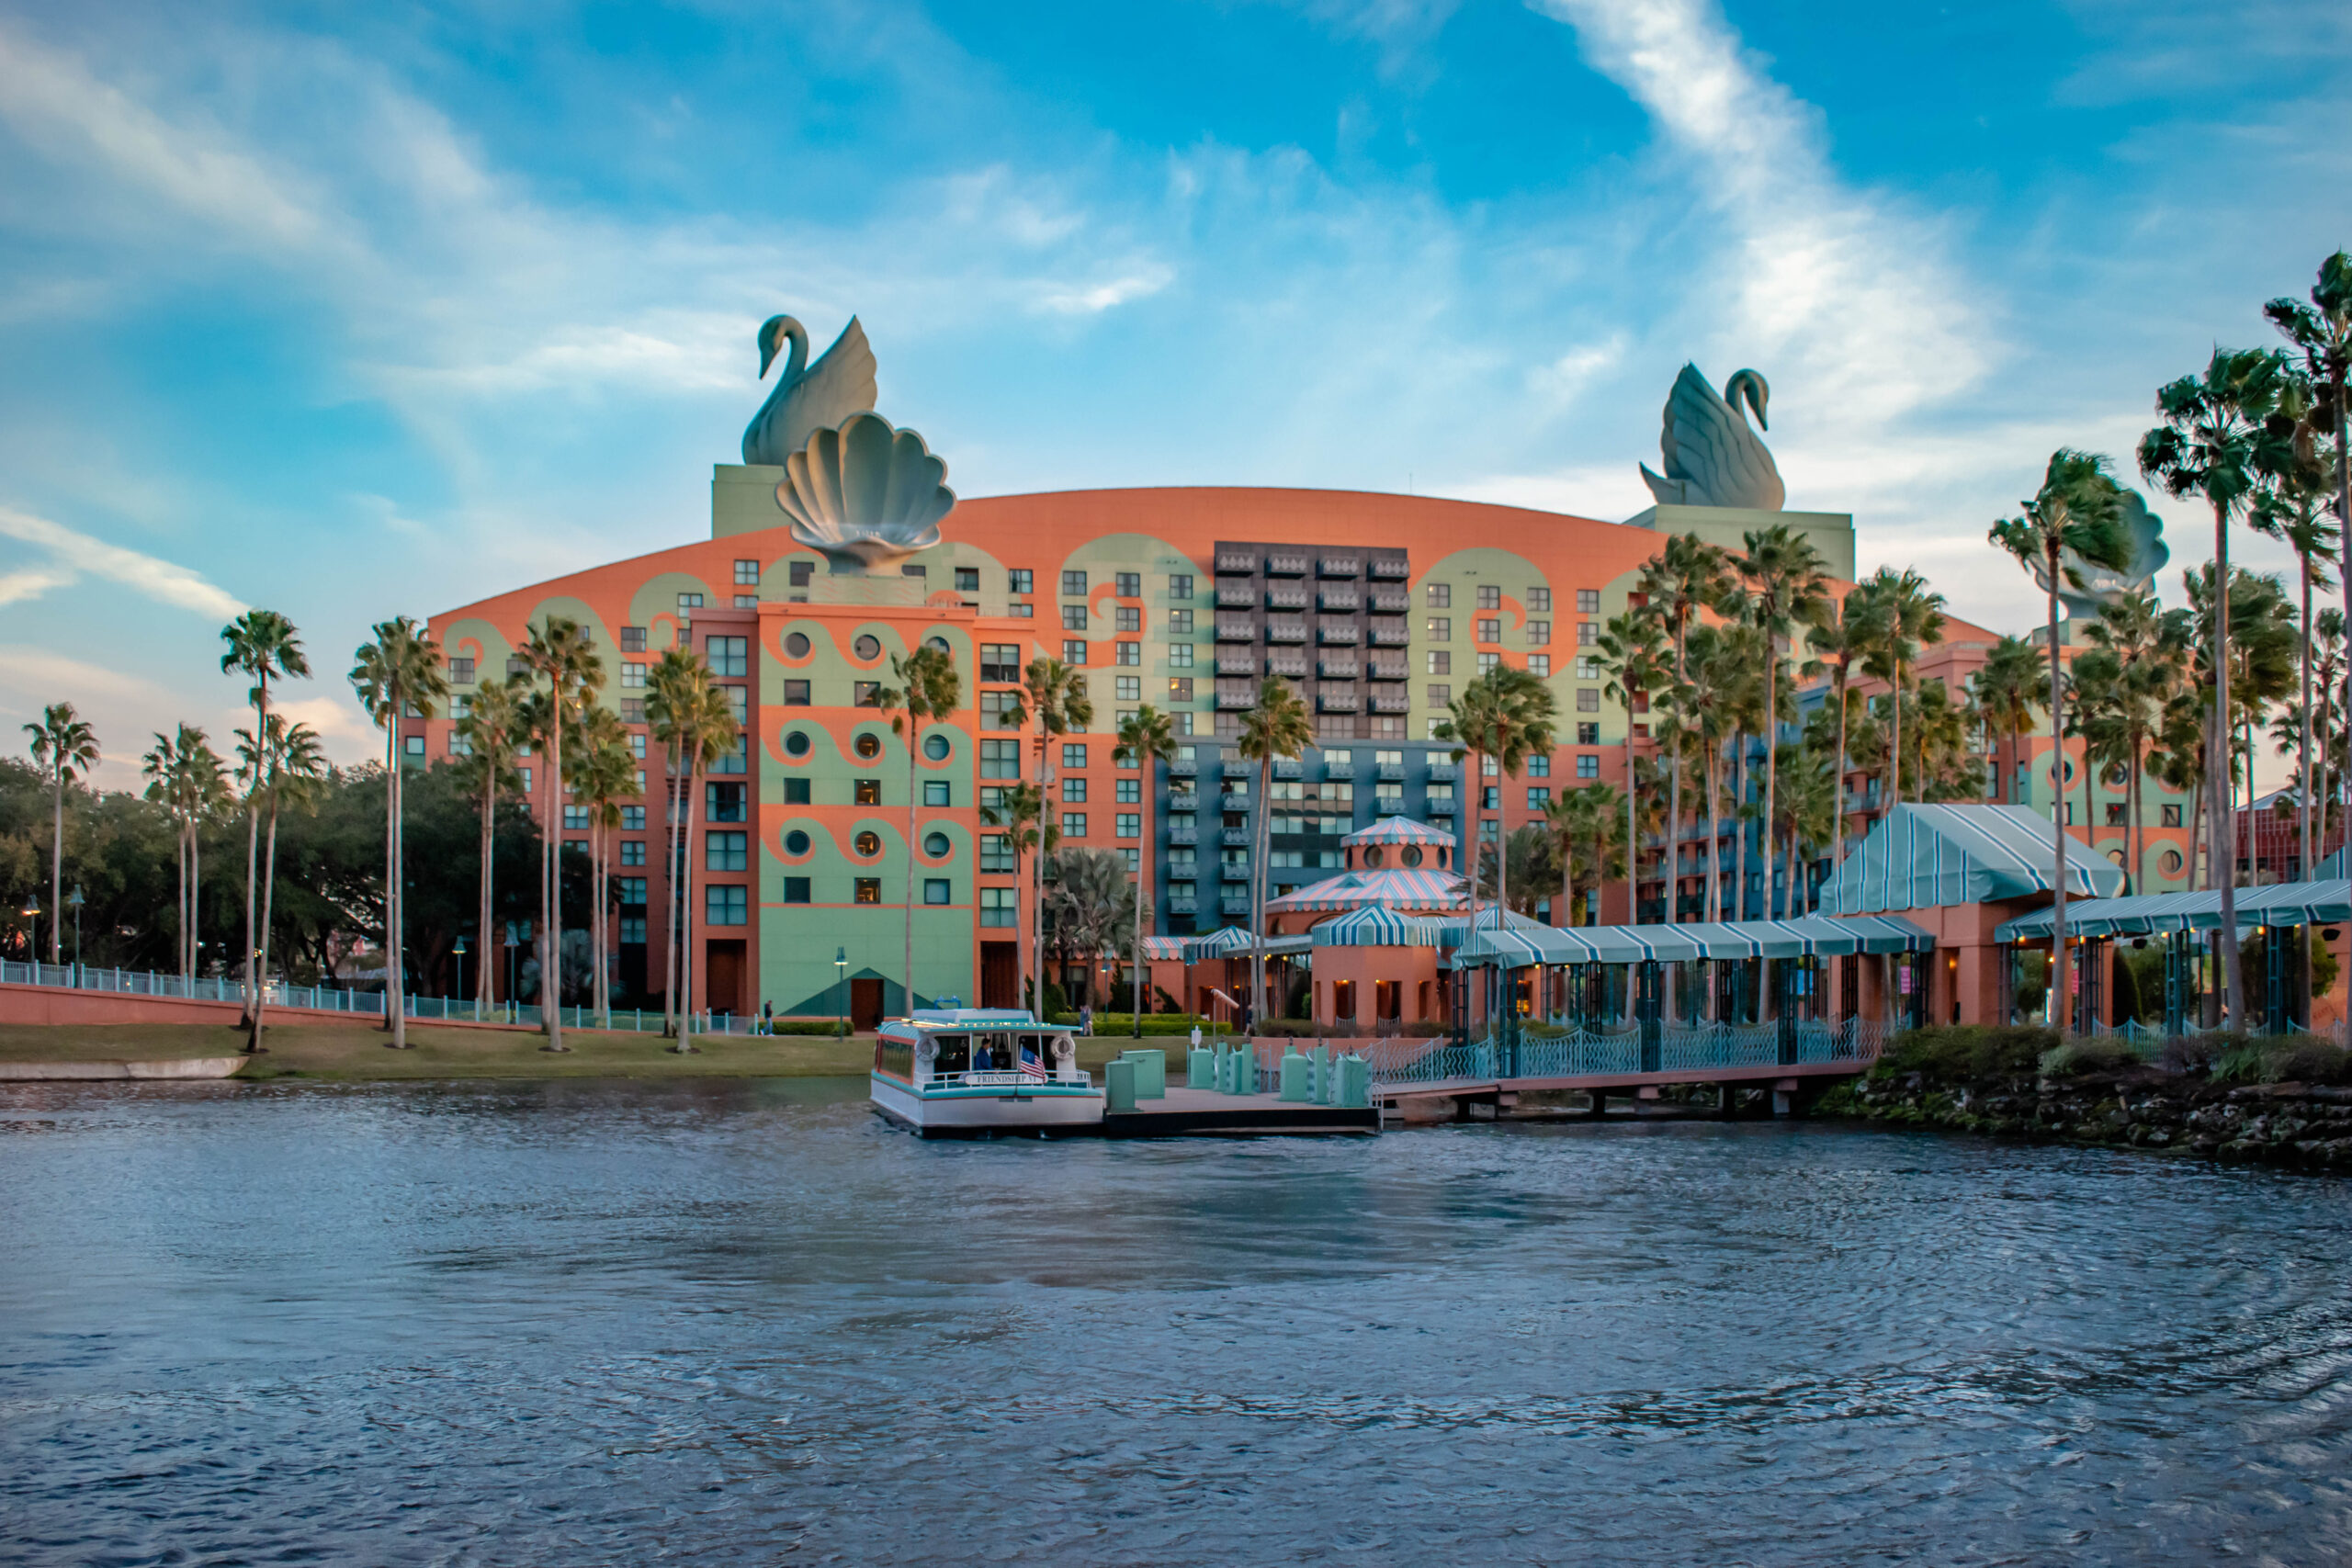 External view of the Swan and Dolphin hotel in Disney World.